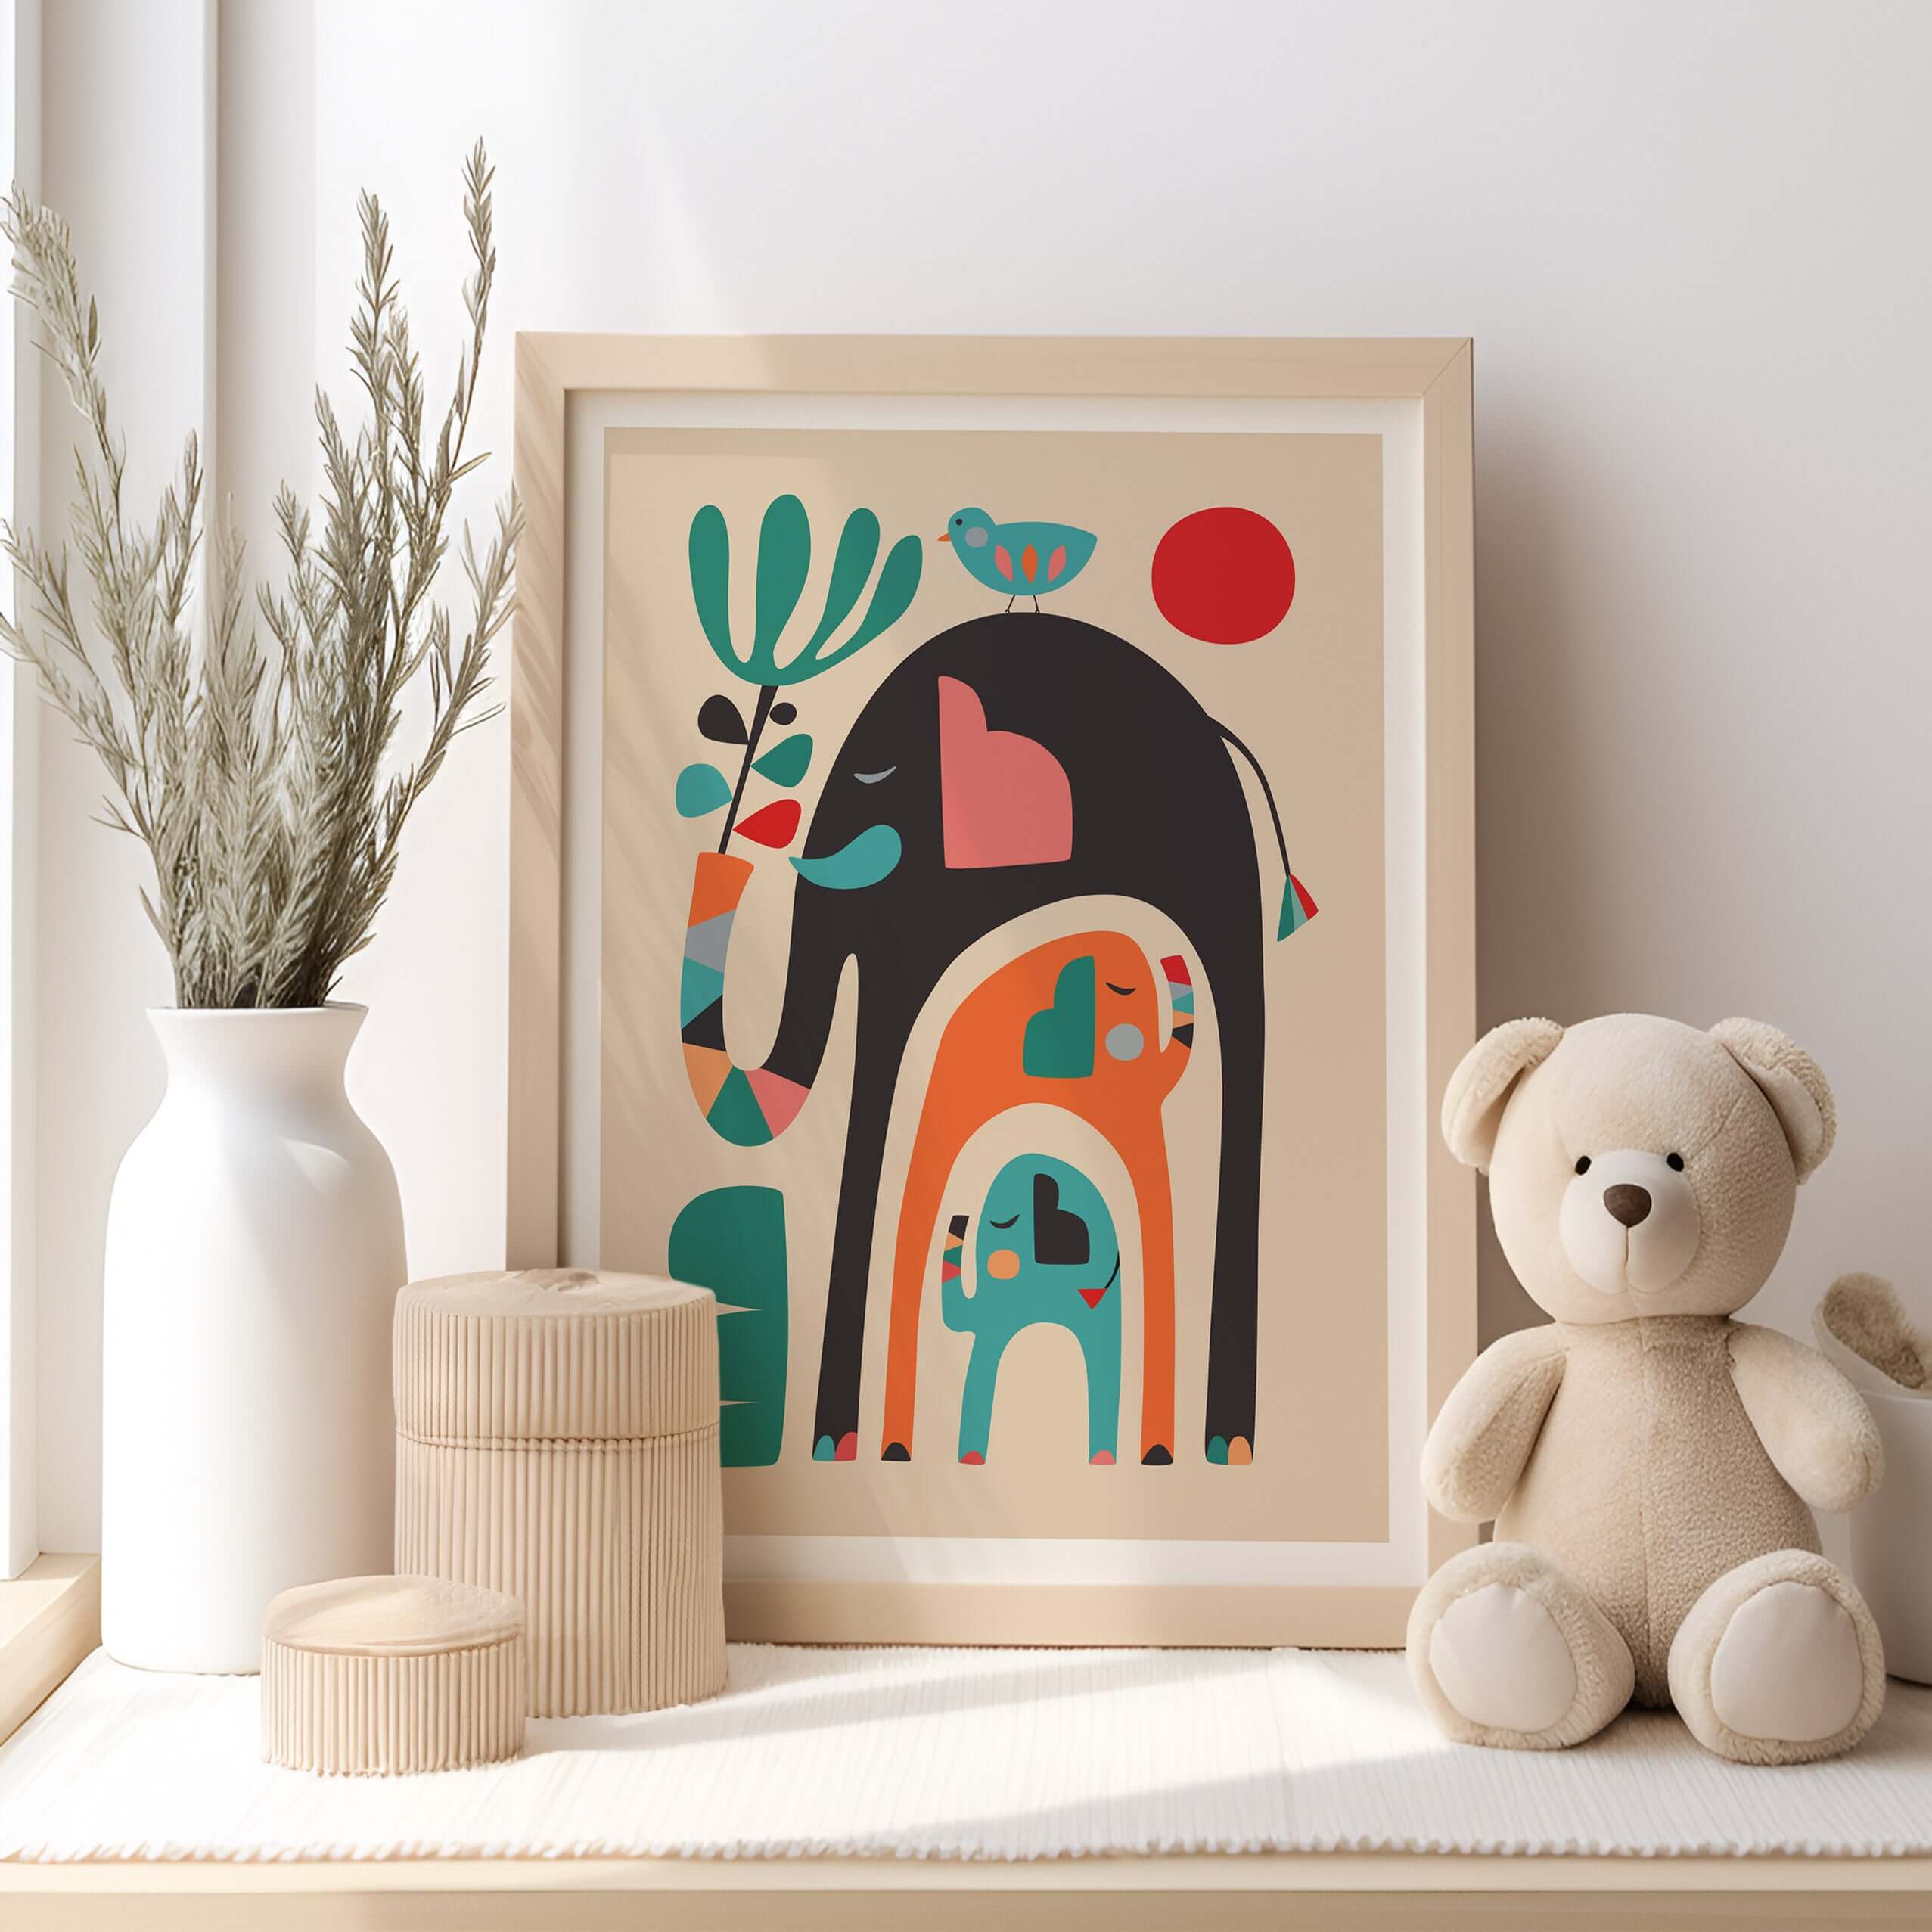 Teddy Bear sitting near framed picture, with 3 elephants print displayed.